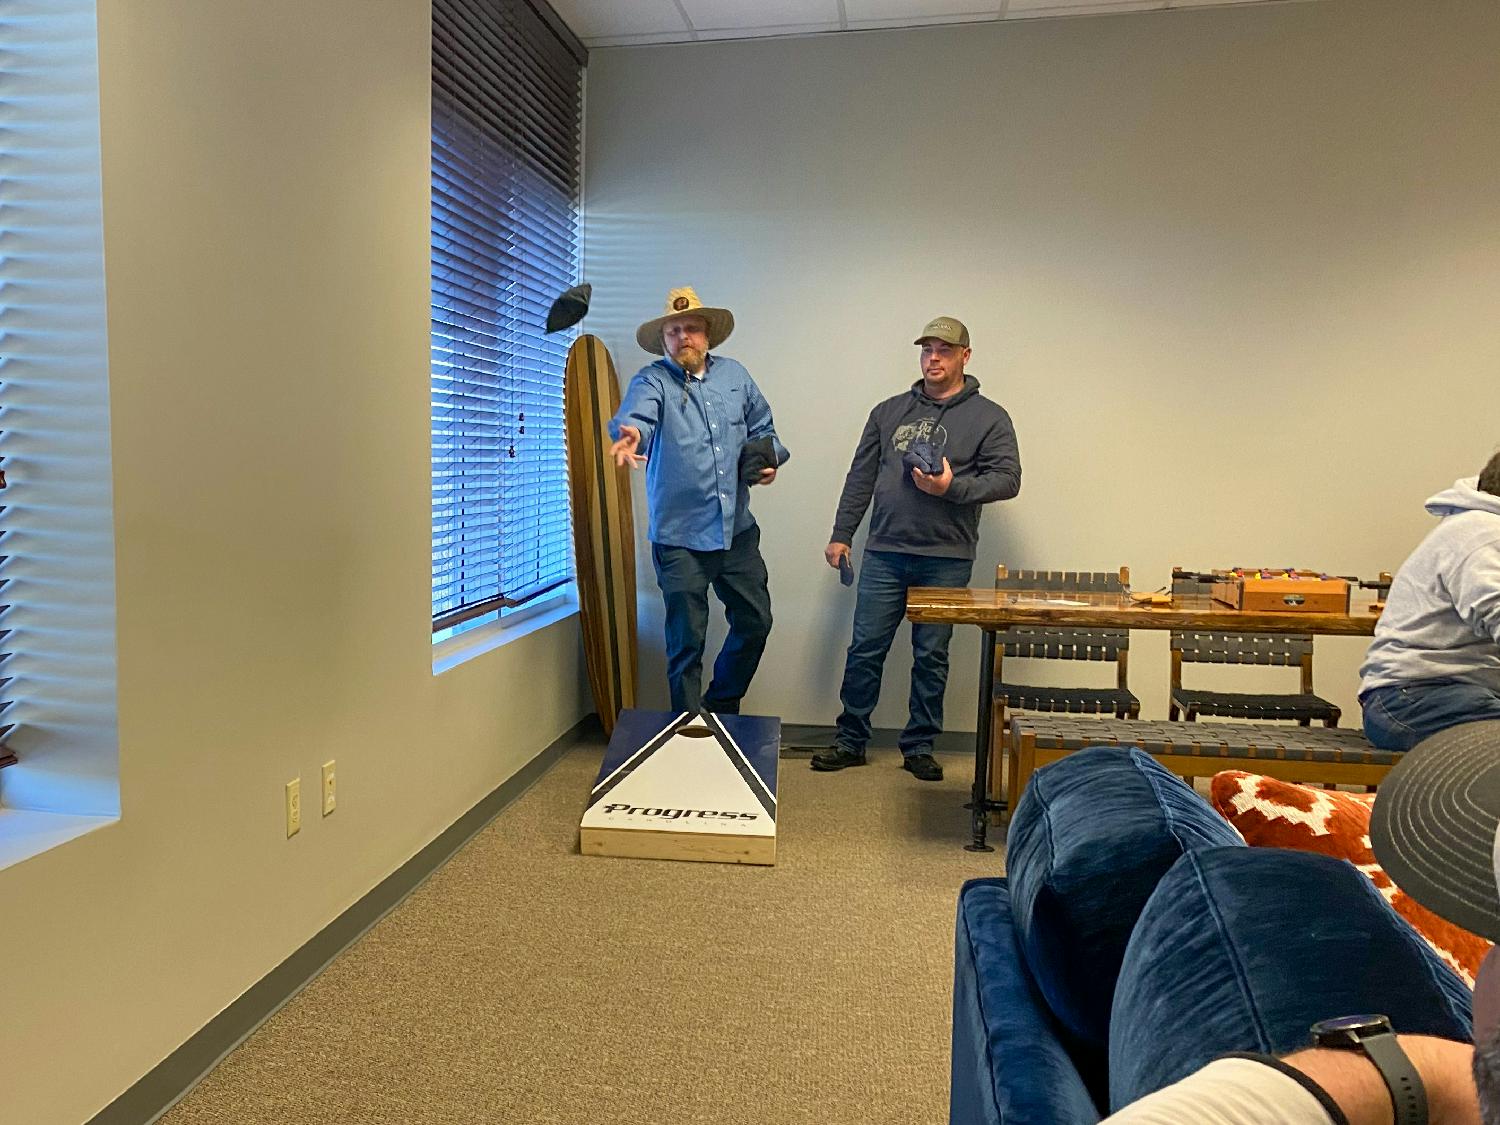 Friendly game of office corn hole